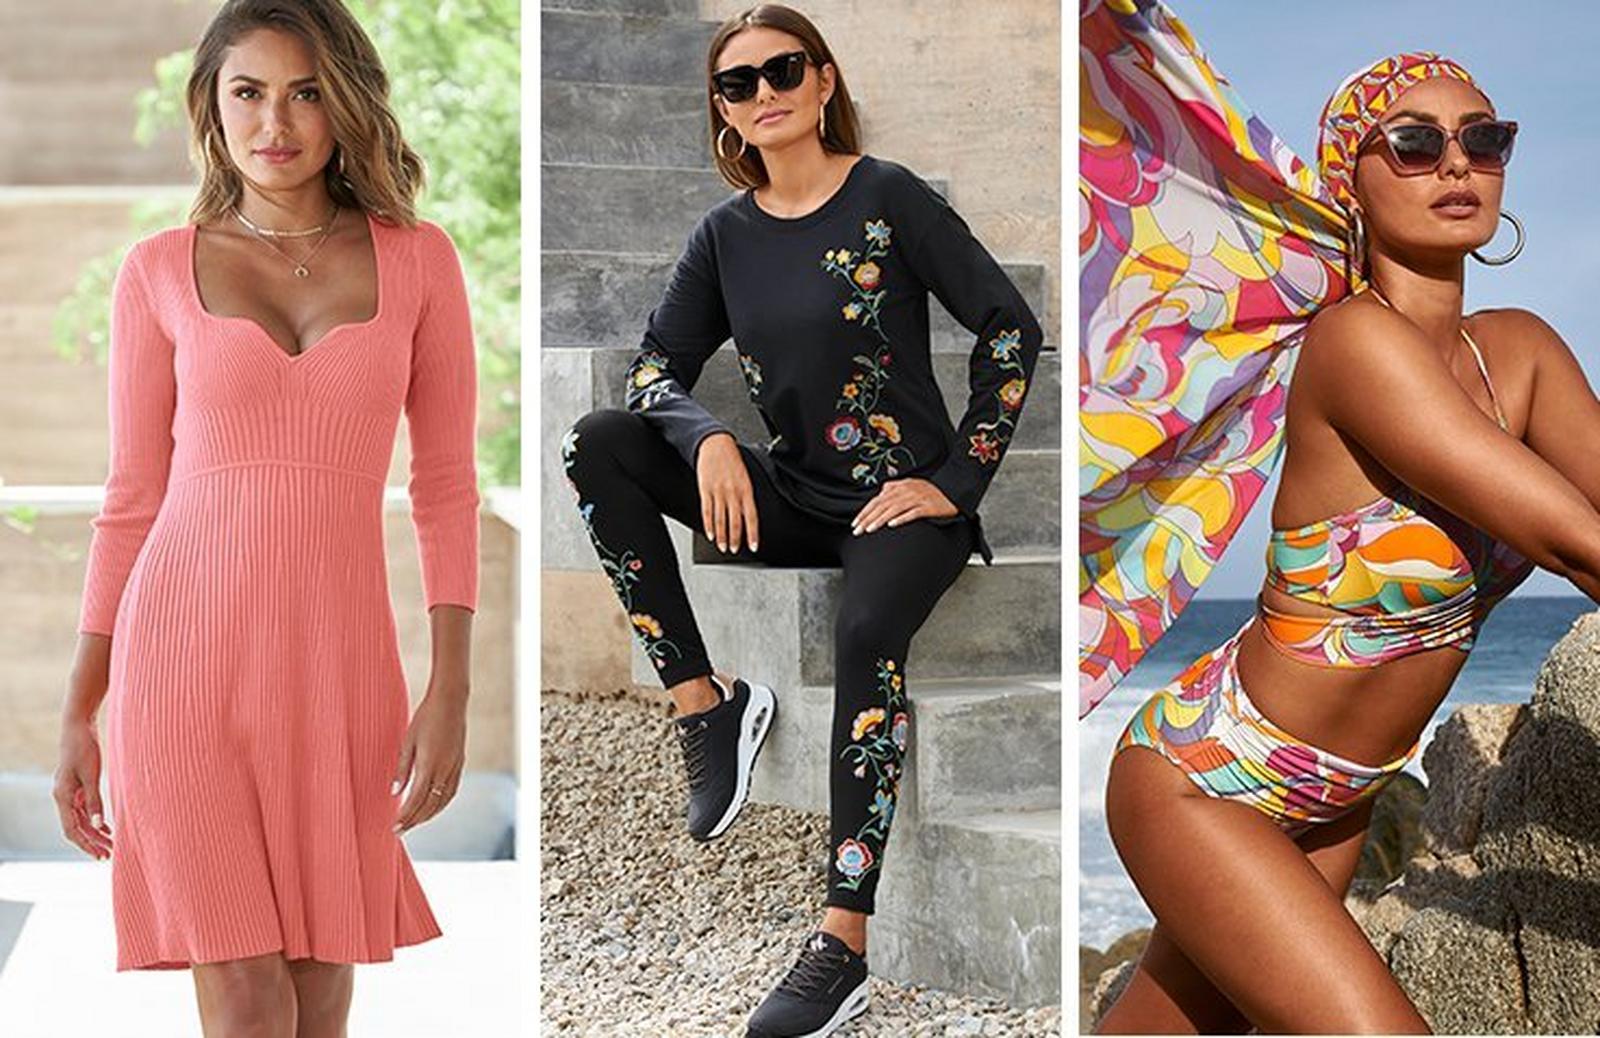 left model wearing a pink ribbed fit-and-flare three-quarter sleeve dress. middle model wearing a black floral embroidered sweatshirt, black floral embroidered leggings, black sneakers, and sunglasses. right model wearing a sunset print bikini, matching headwrap, and sunglasses.